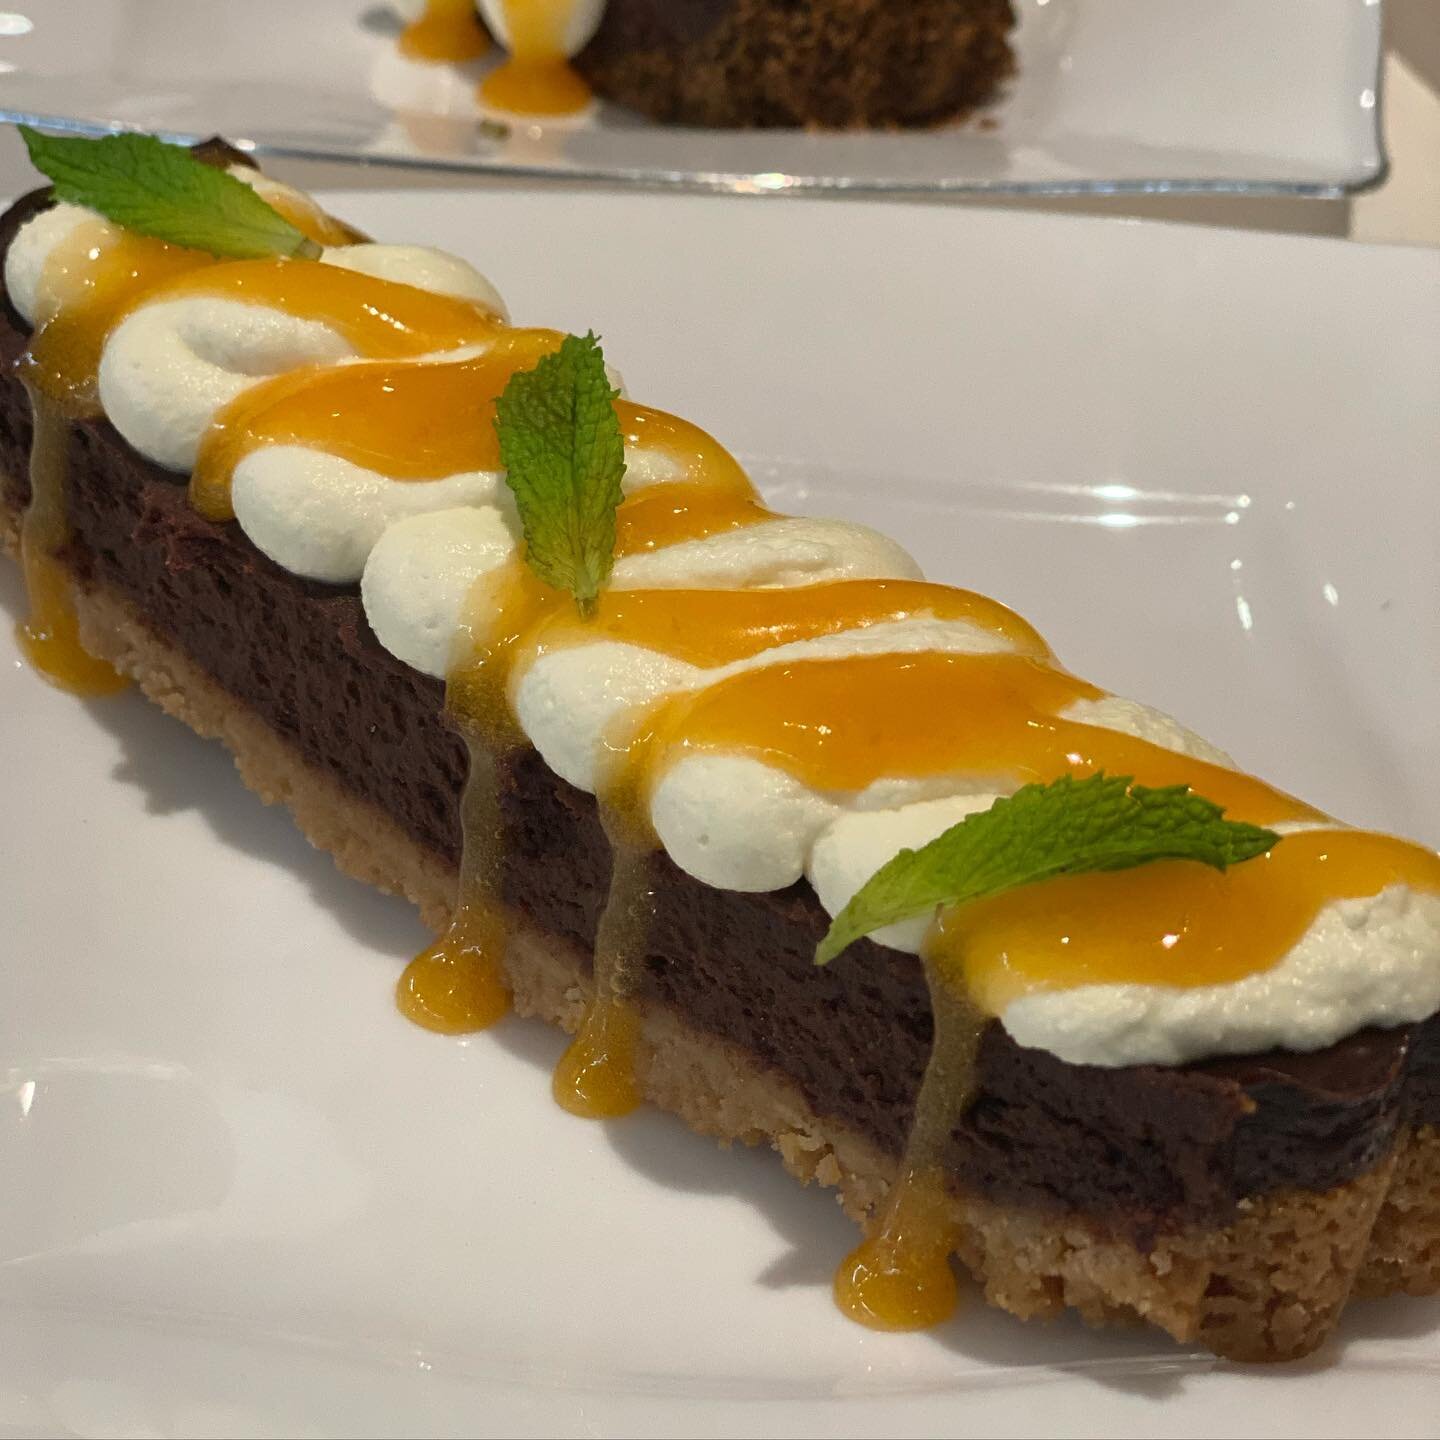 Tart...or art???
Bittersweet chocolate tart with sugar cookie crust, cr&eacute;me fra&icirc;che whipped cream, and apricot coulis!